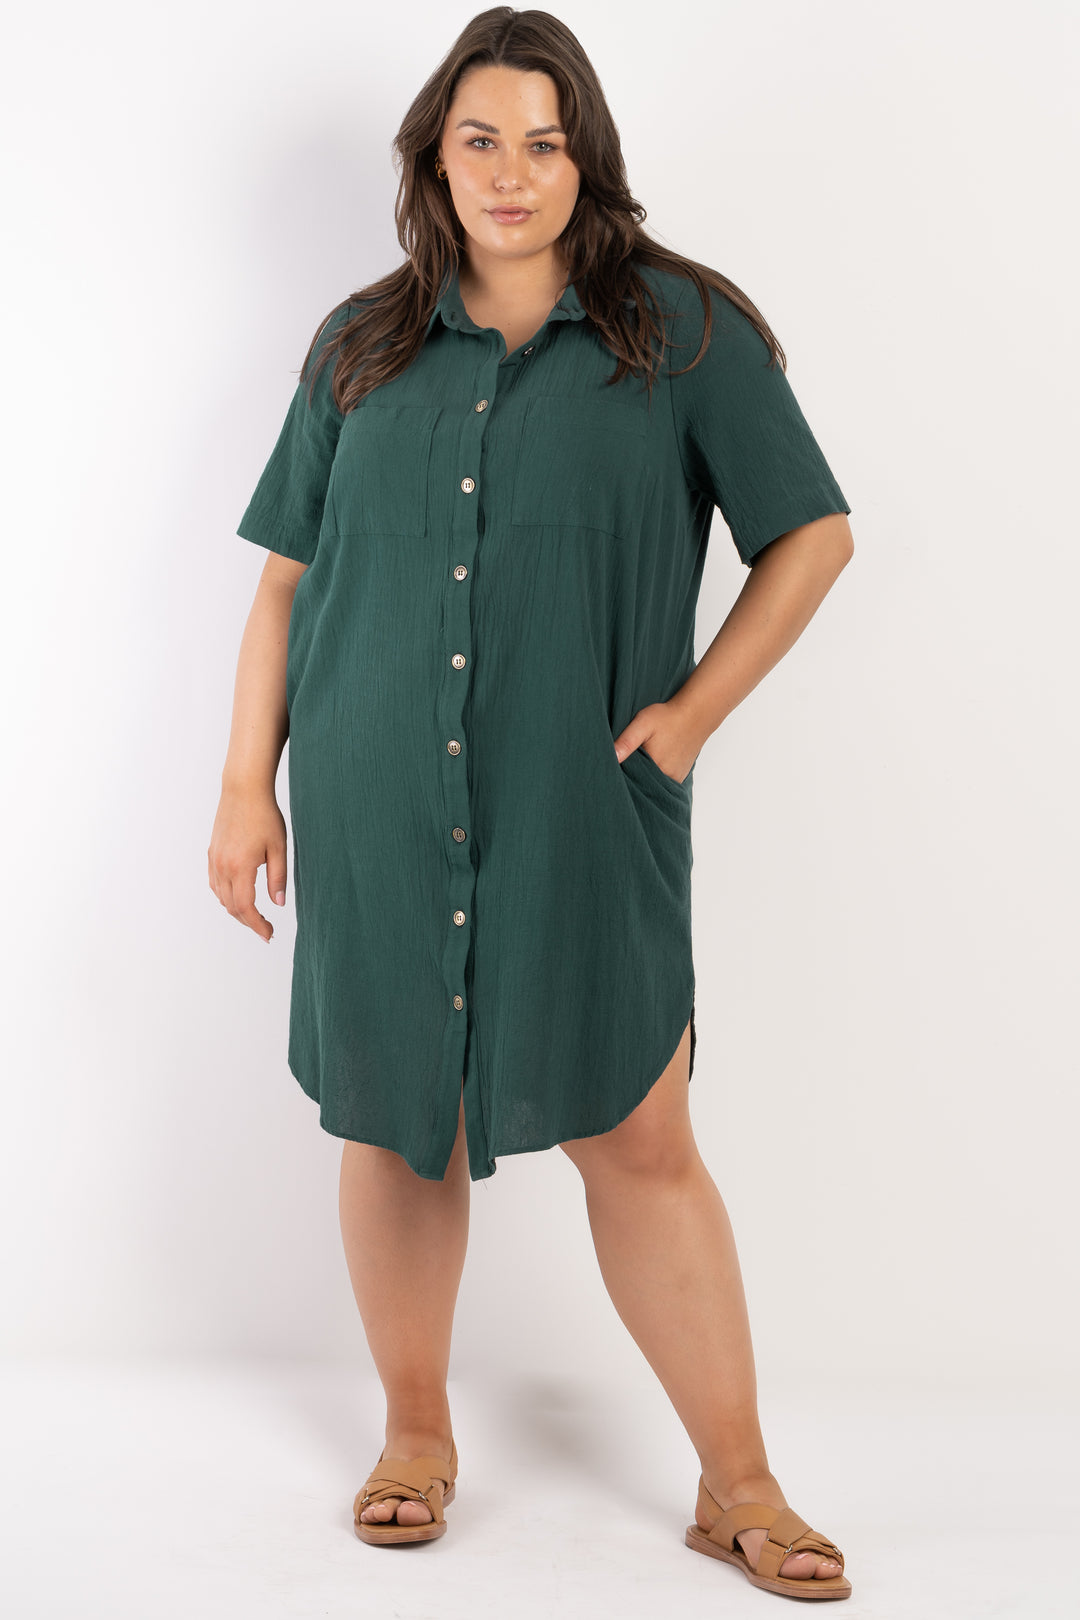 It's Alright Linen Short Sleeve Dress - Green - STOCK AVAILABLE - S (14/16)